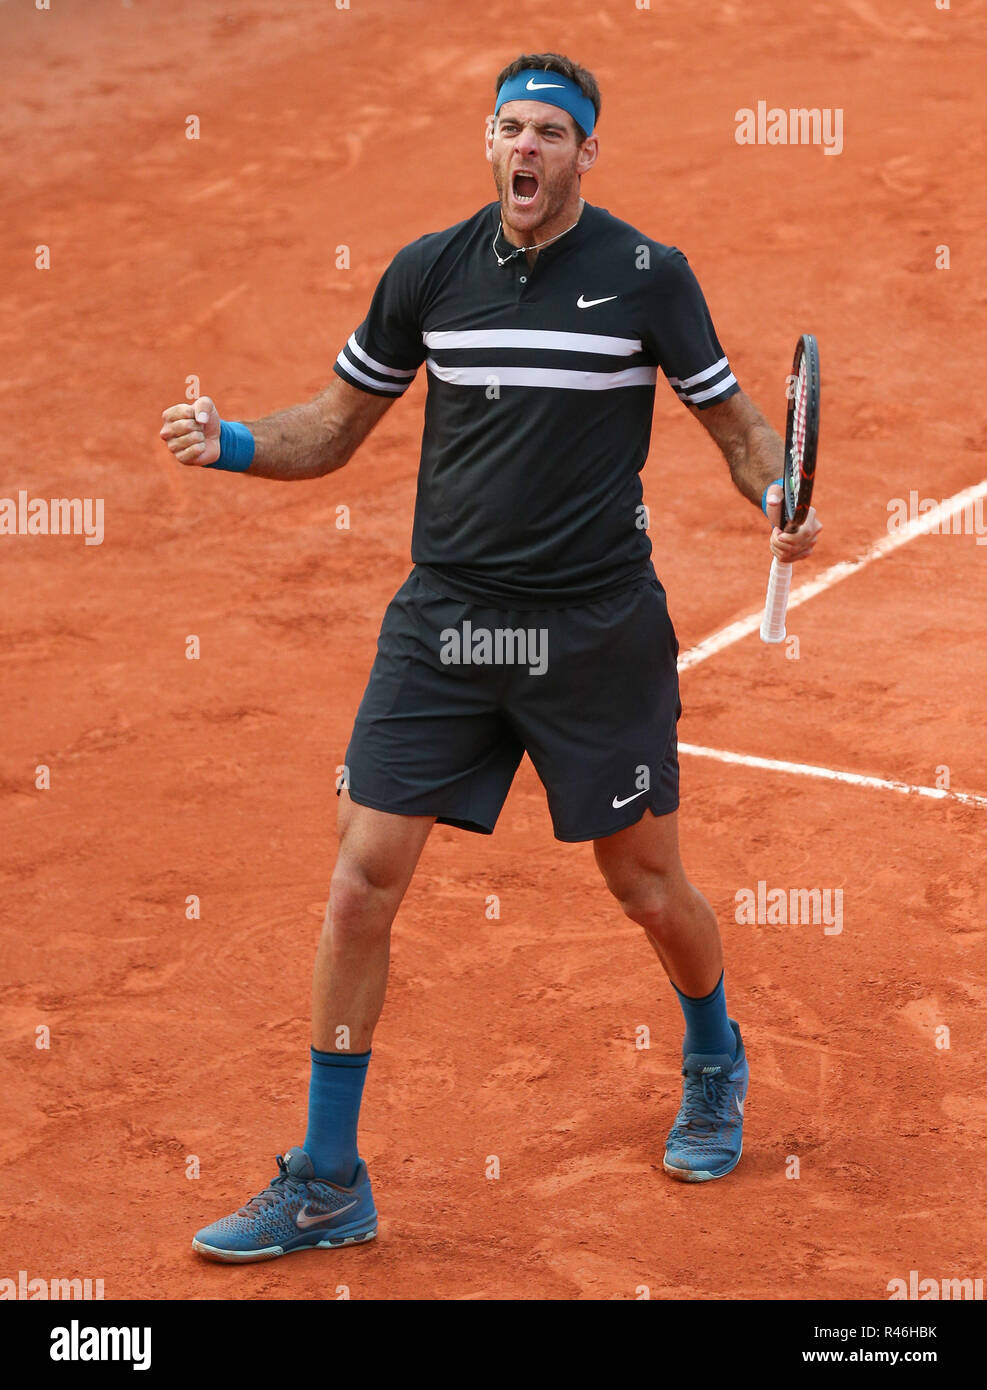 Argentine tennis player Juan Martin del Potro celebrating victory during  French Open 2018,Paris, France Stock Photo - Alamy